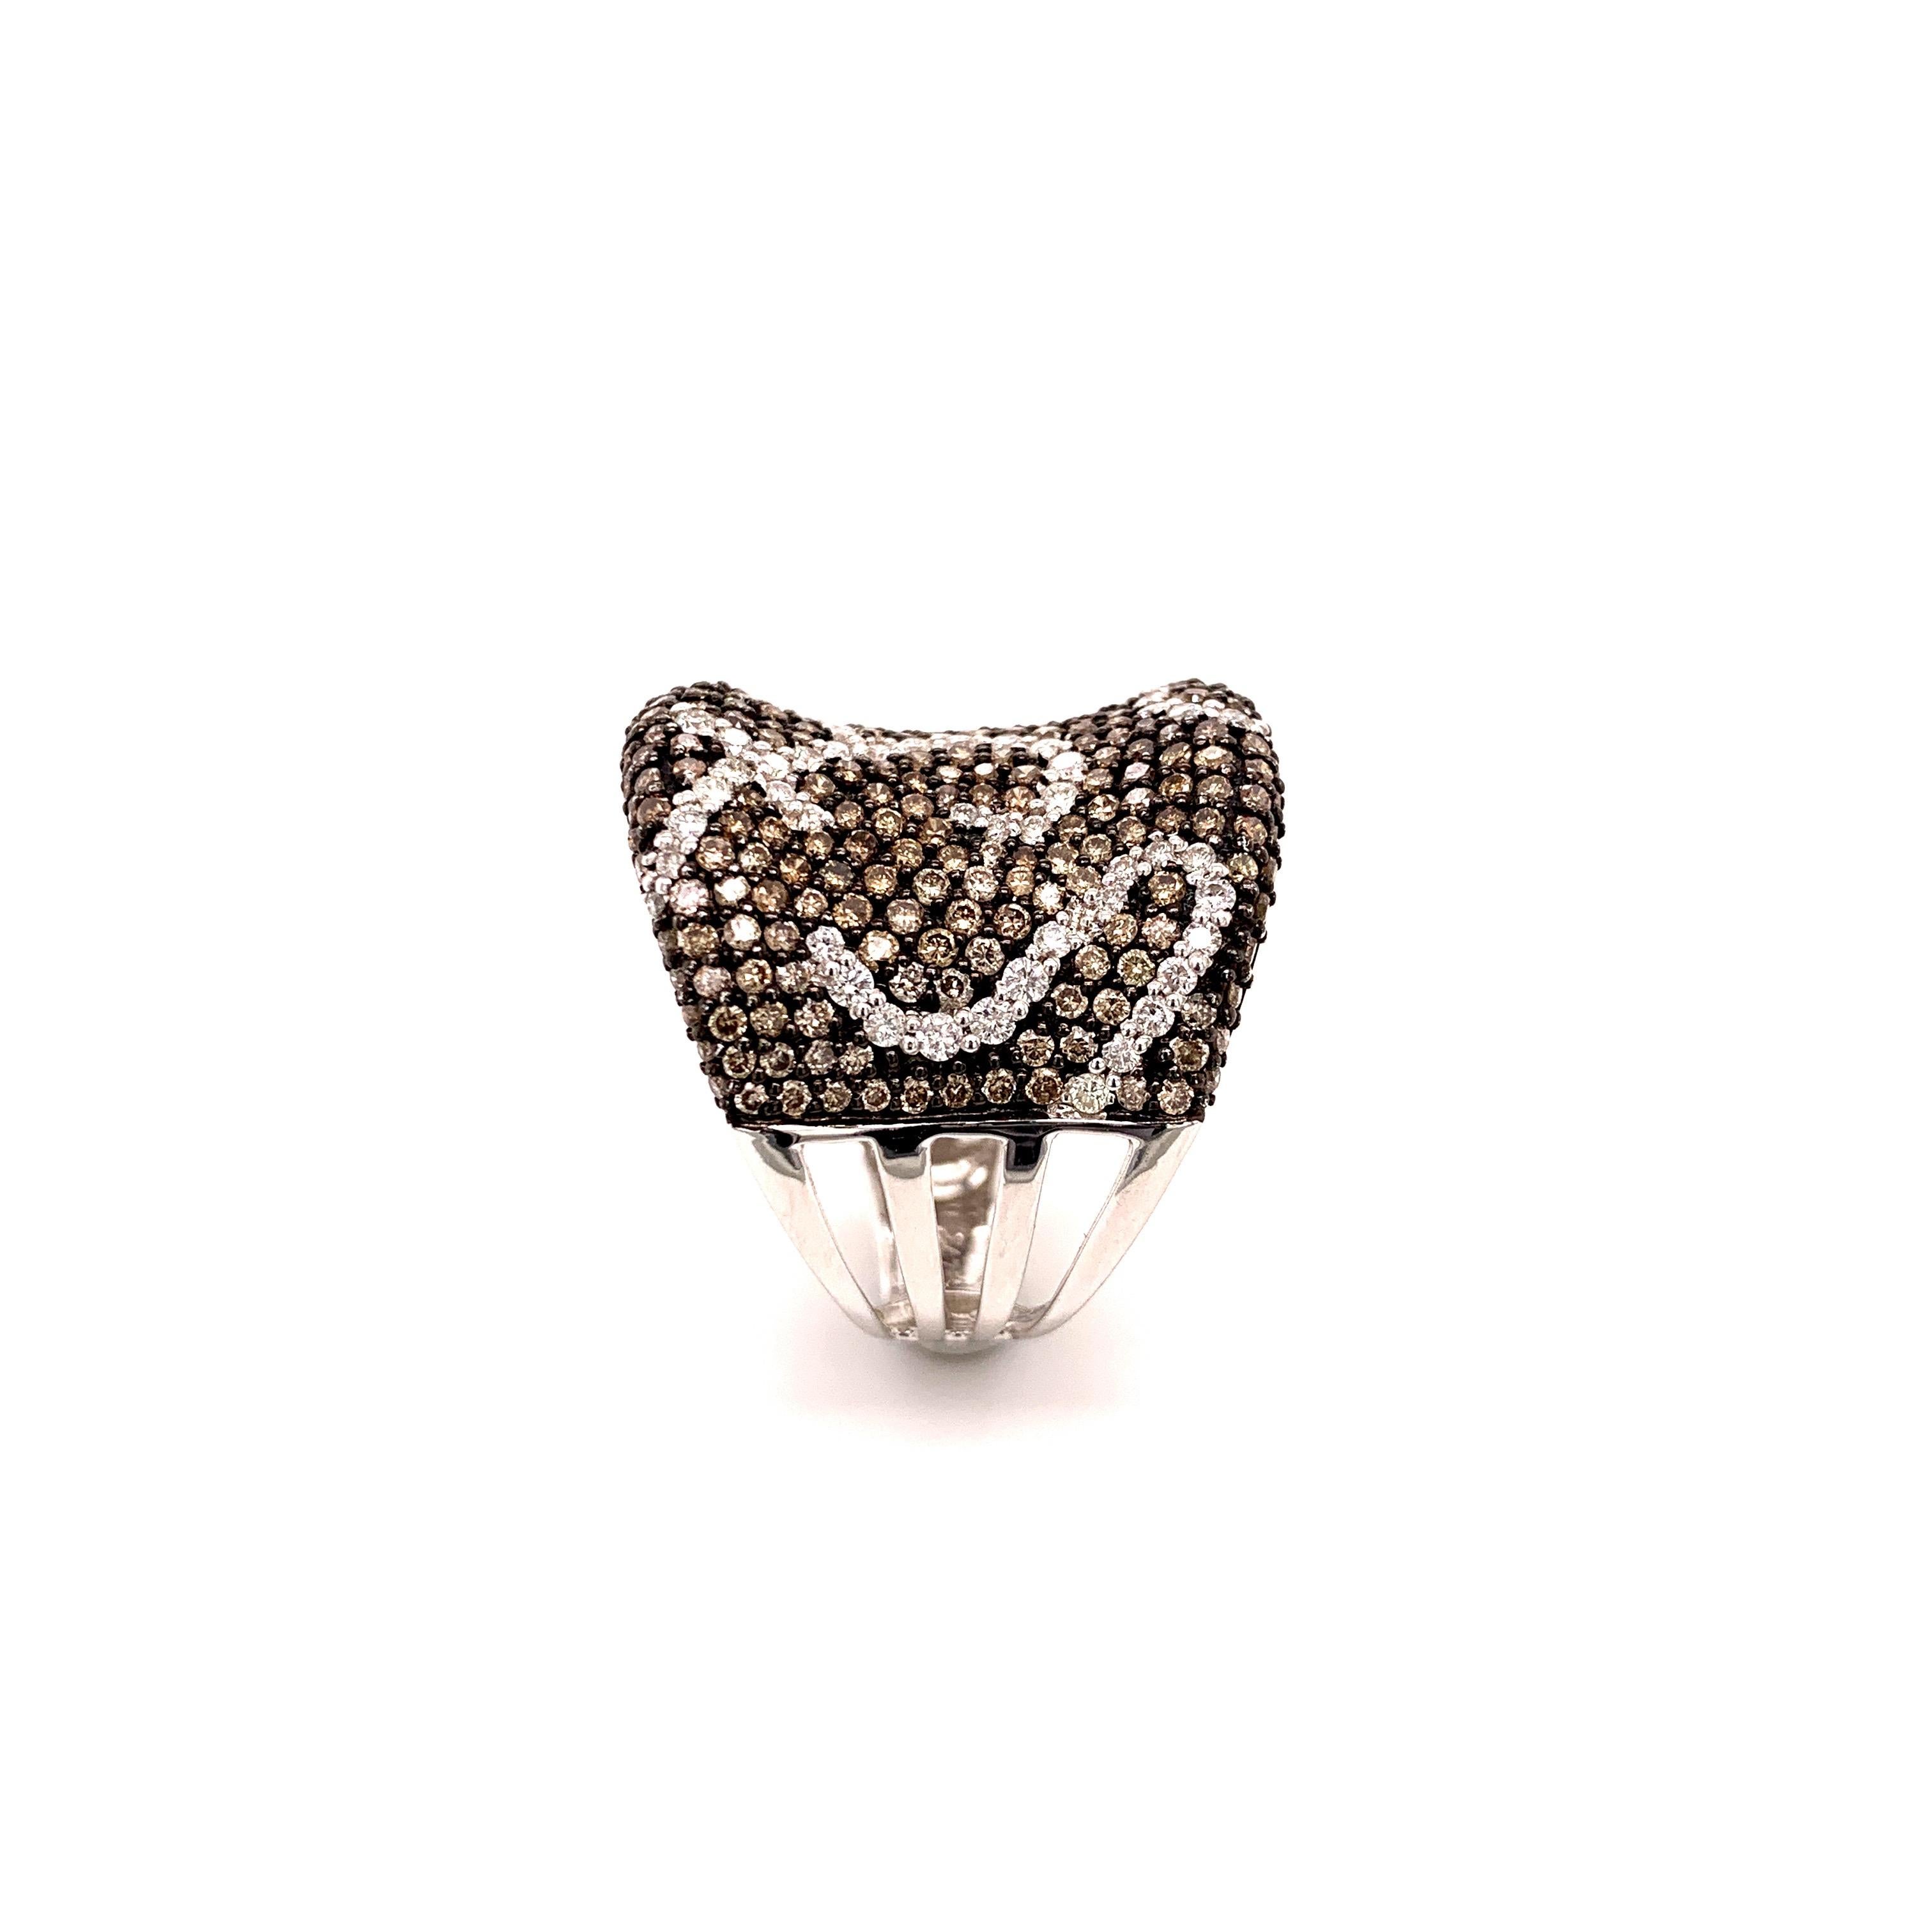 Contemporary 2.04 Carat Fancy Brown Diamond Cocktail Ring